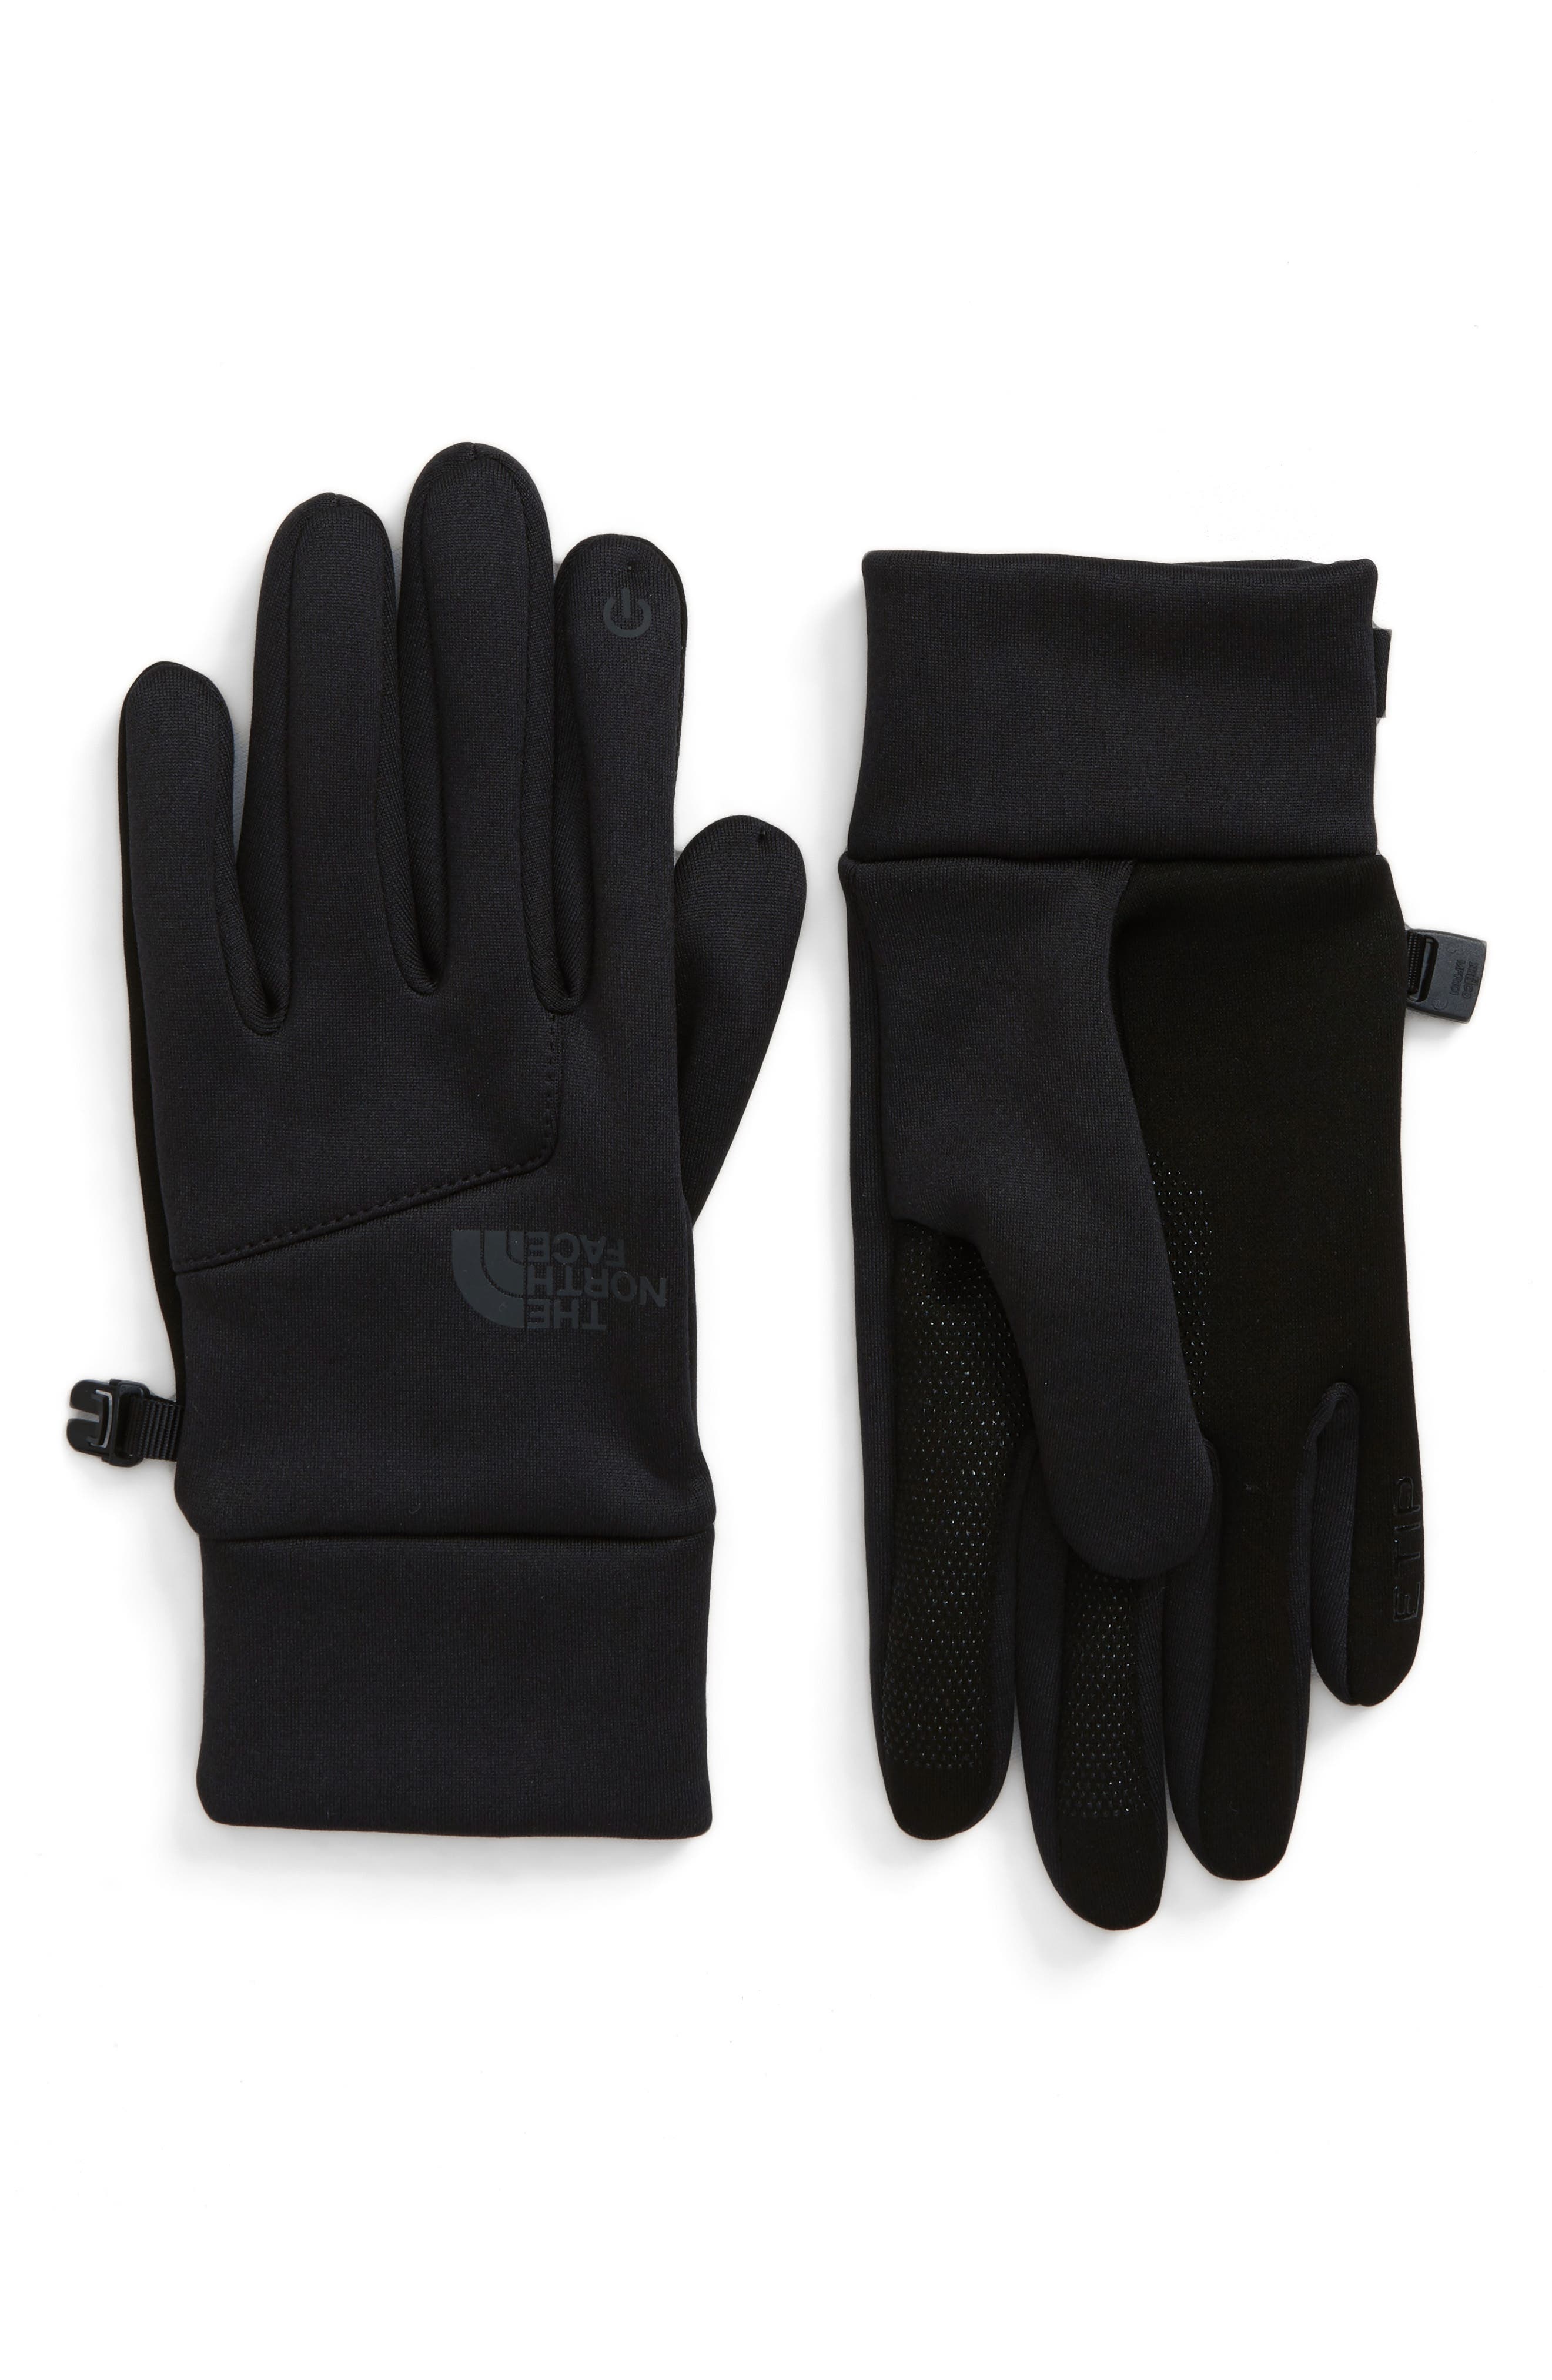 north face etip hardface gloves review